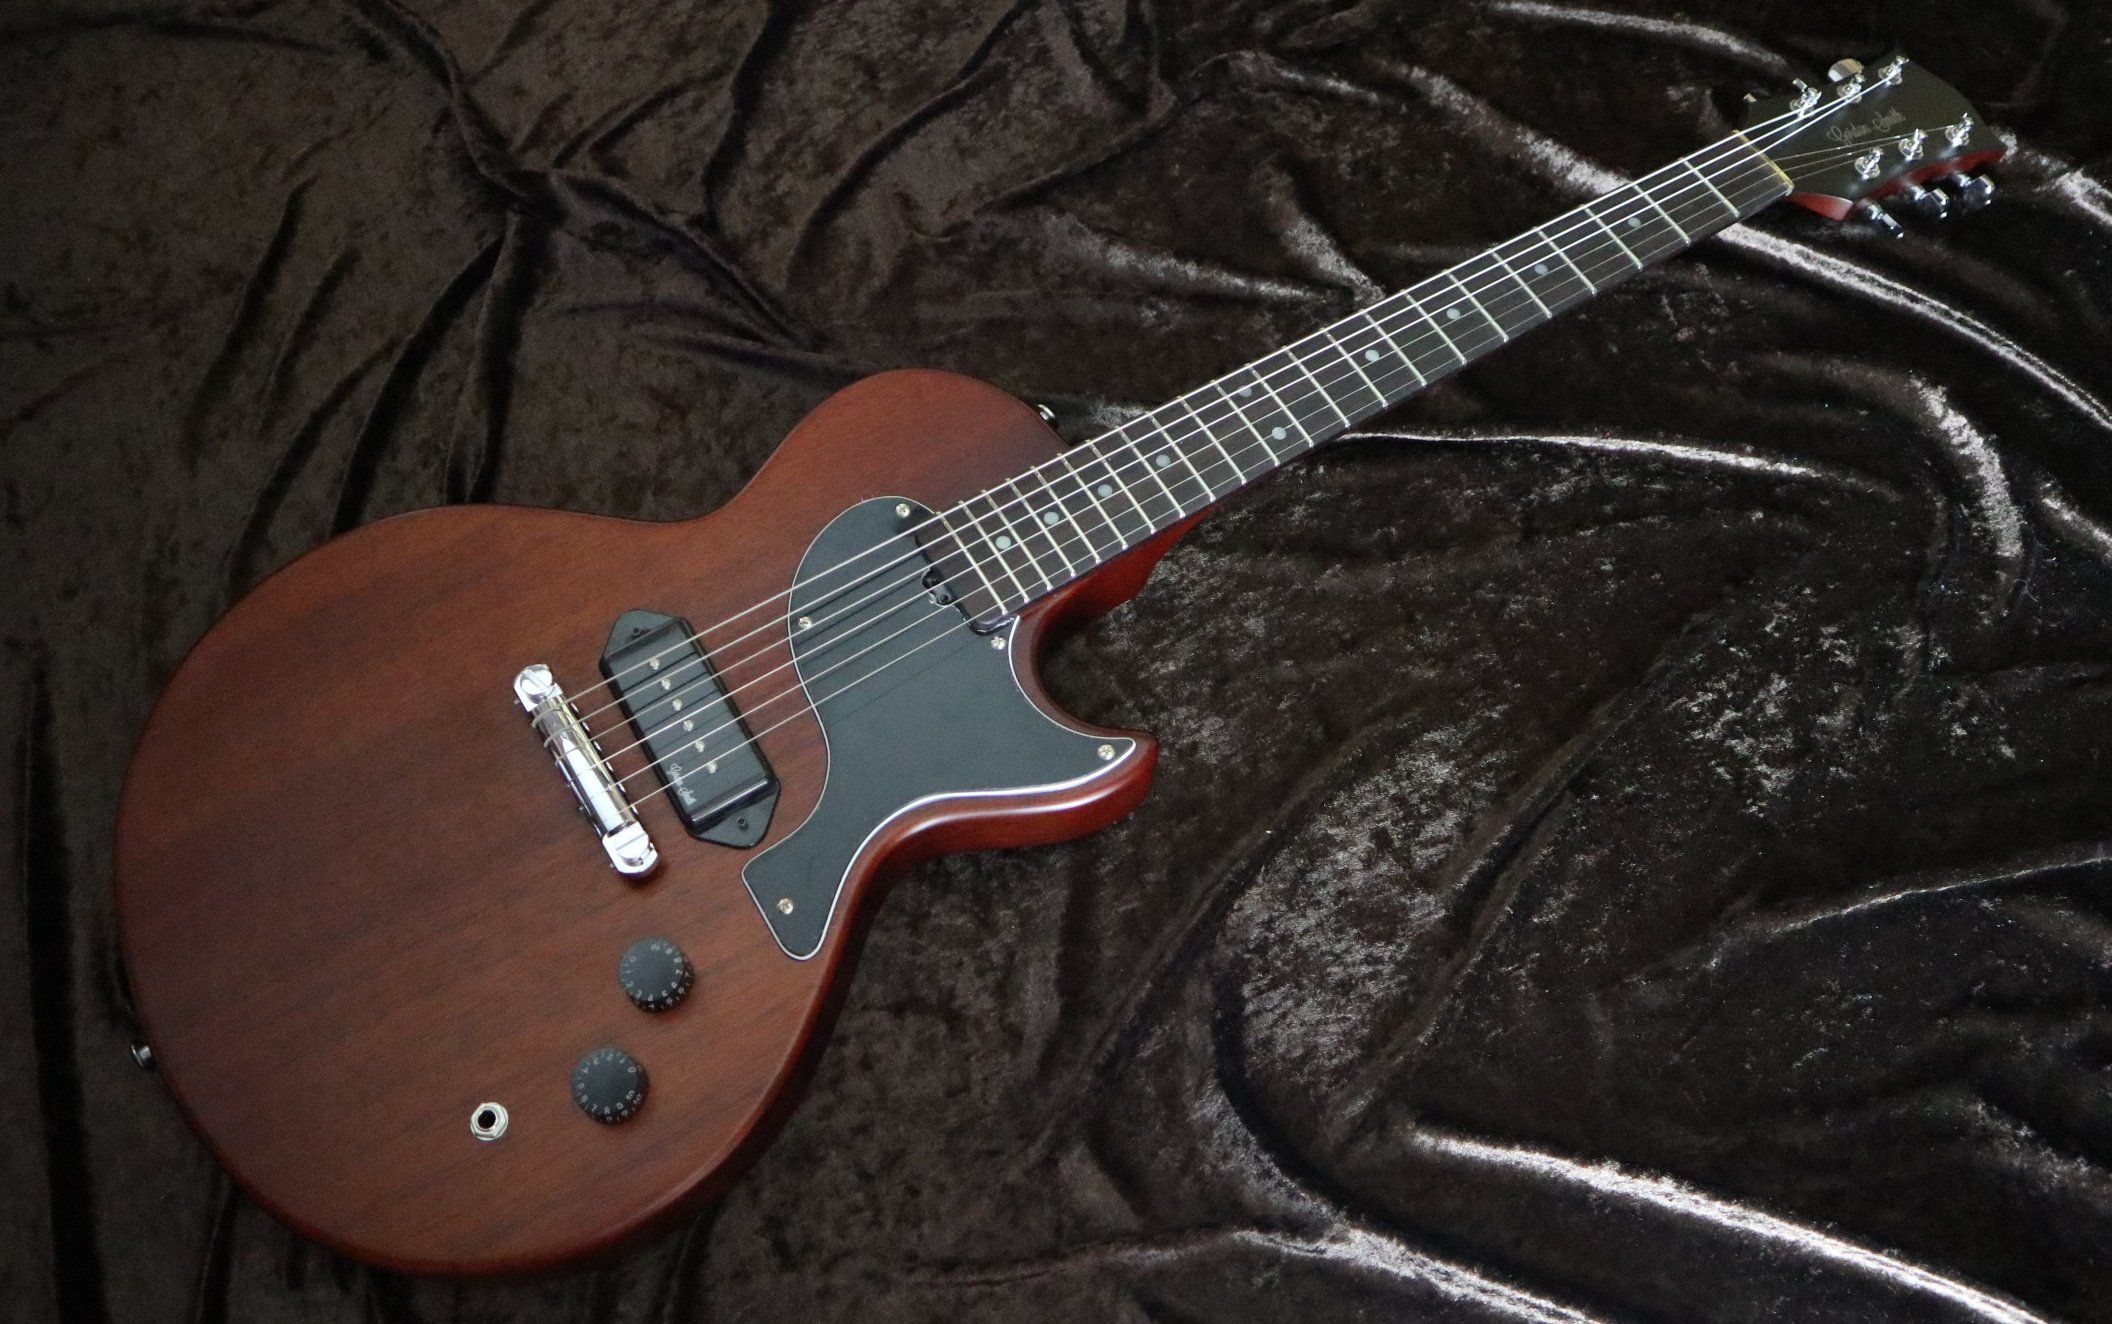 Gordon Smith GS1 Thick Body Mahogany P90, Electric Guitar for sale at Richards Guitars.